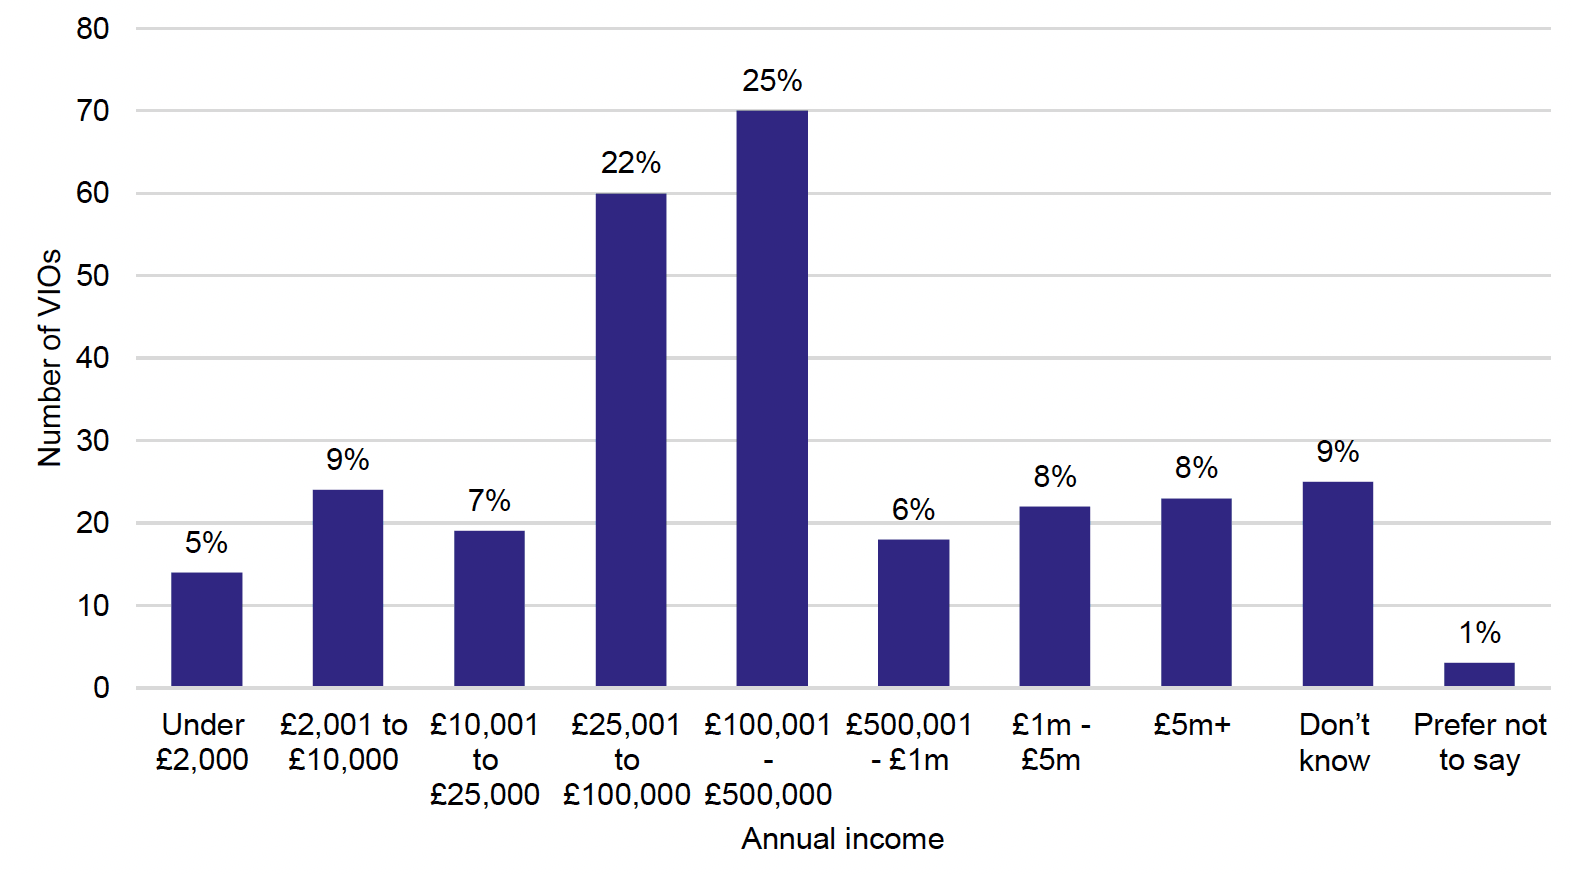 Chart showing the annual income of volunteer-involving organisation respondents, by different income bands